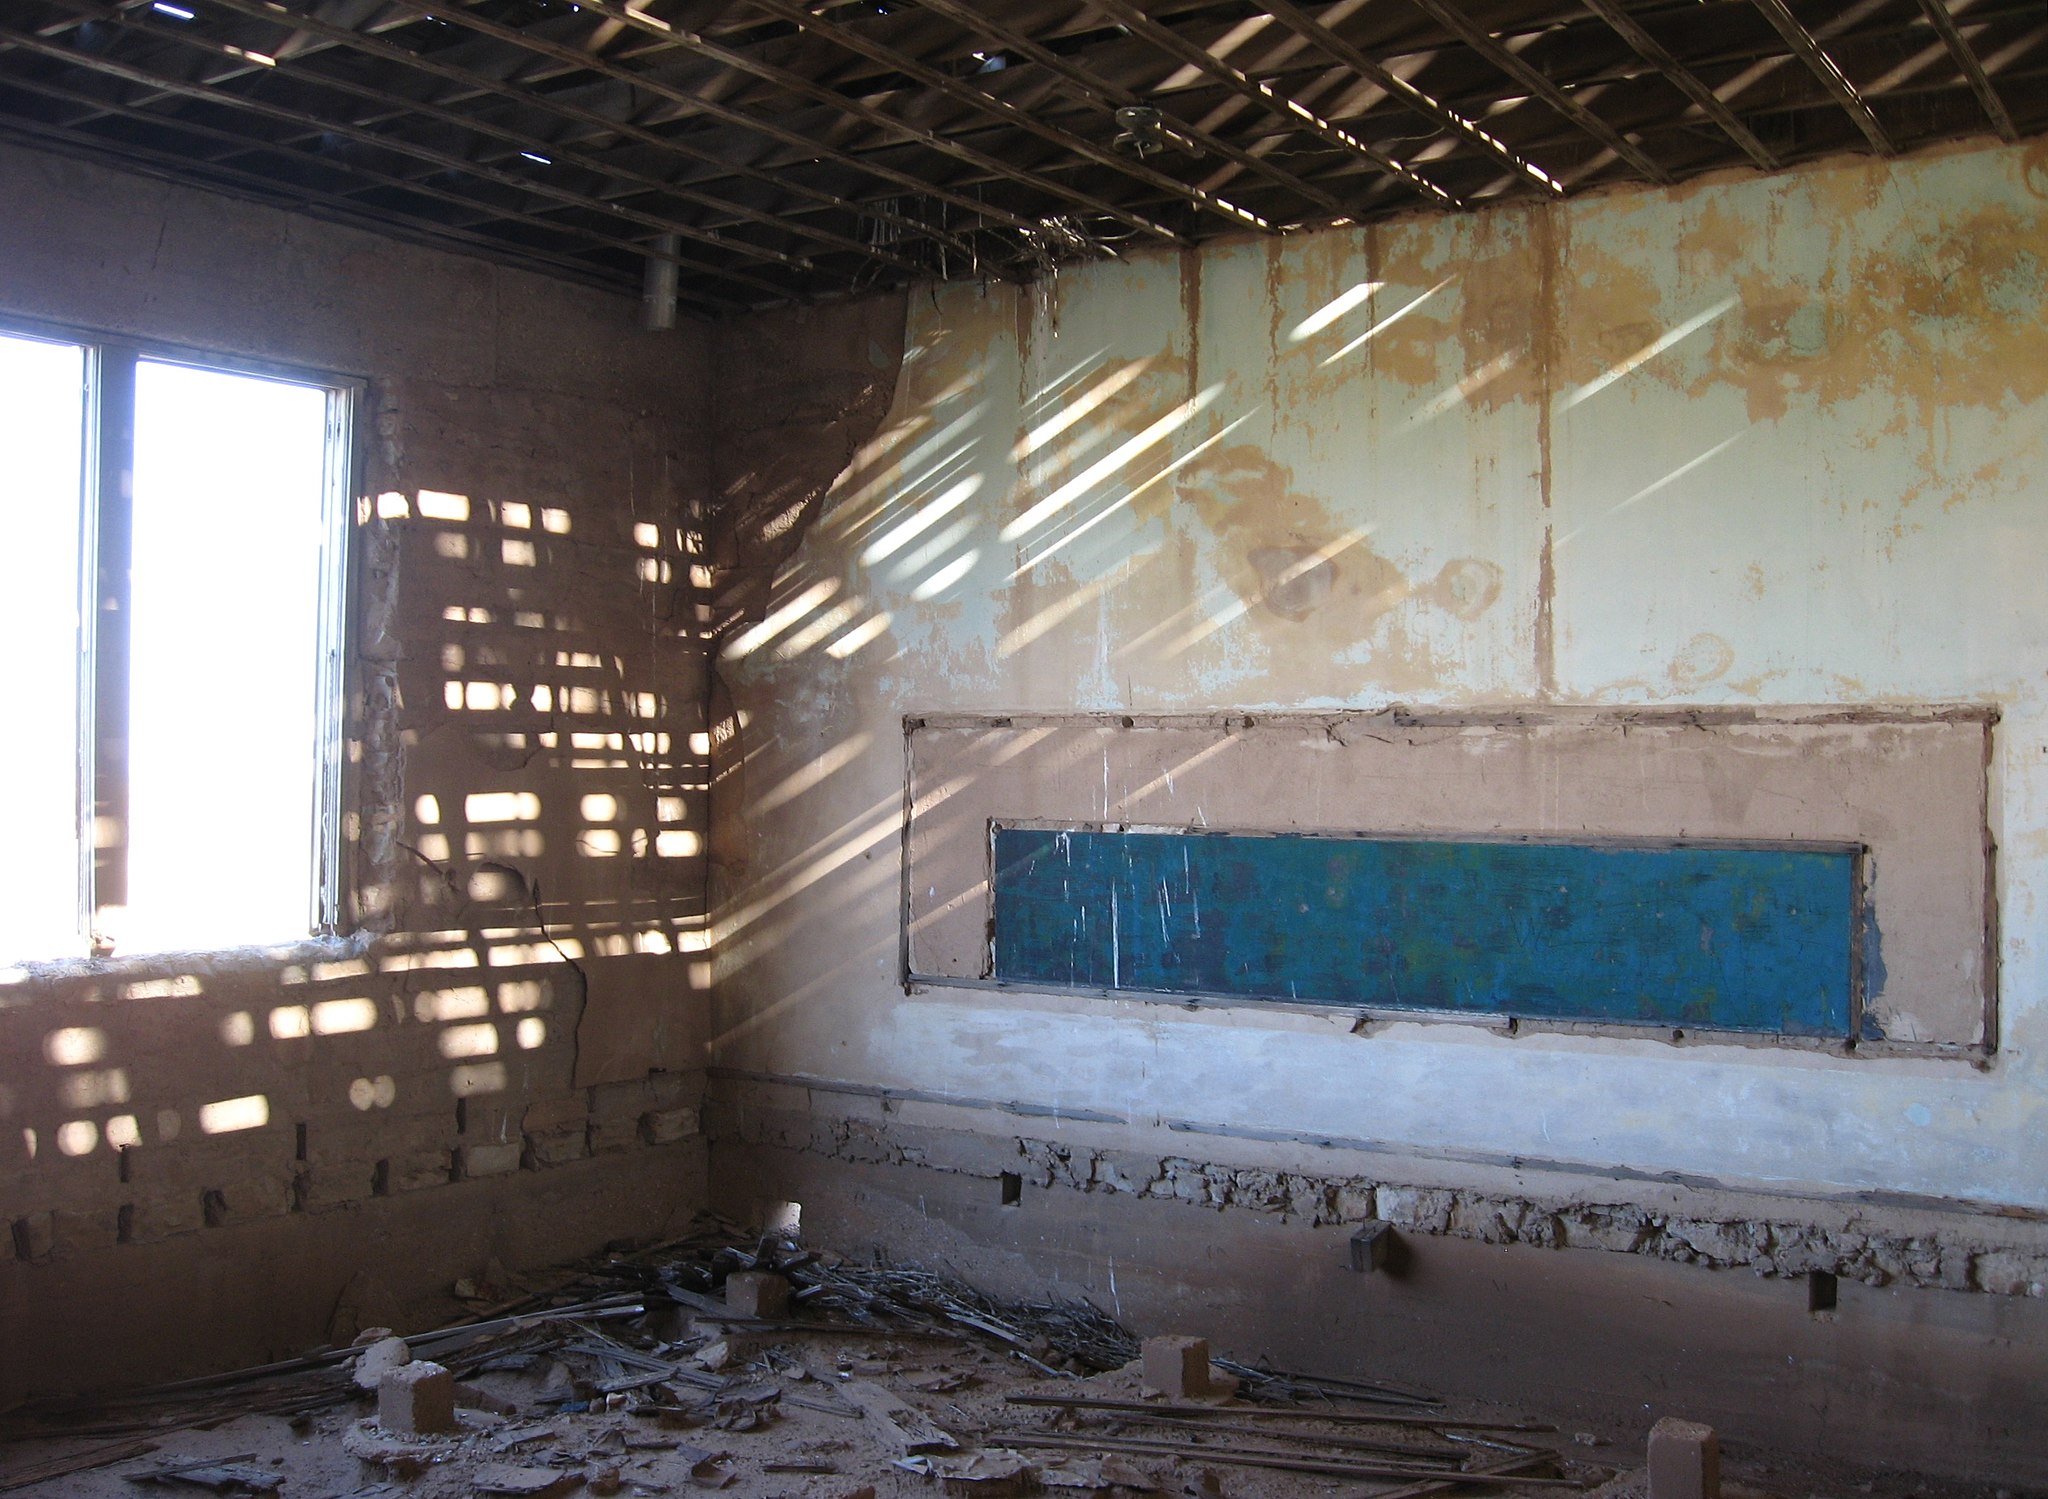 Abandoned classroom in Wheatland, New Mexico. Photo: Wordbuilder (Own work) [GFDL or CC-BY-SA-3.0 via Wikimedia Commons